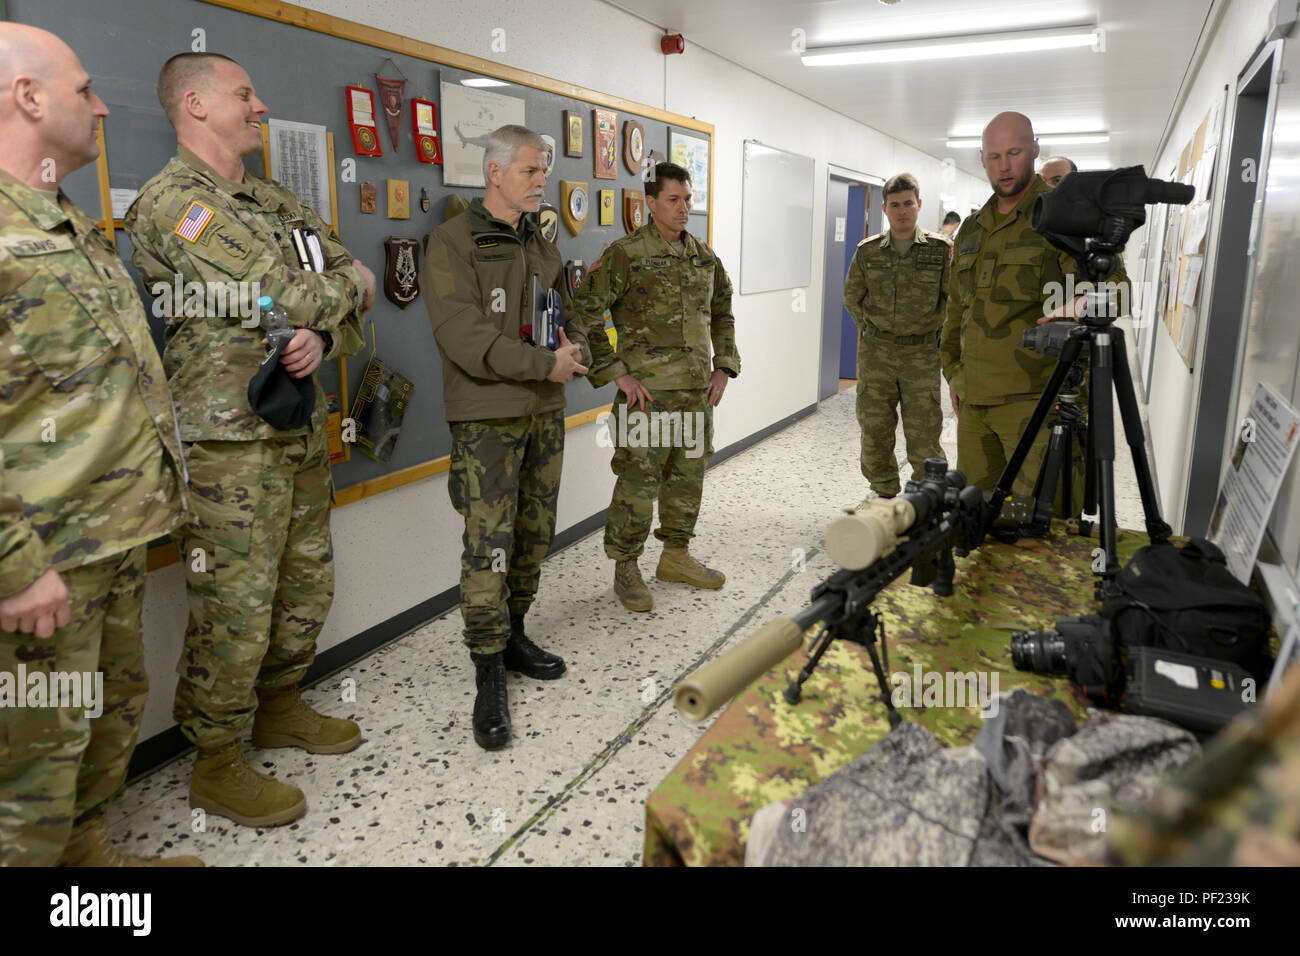 Czech Republic Army Gen. Petr Pavel, chairman of the NATO Military  Committee is hosted by the staff of the International Special Training  Centre for a tour of the multinational training facility located